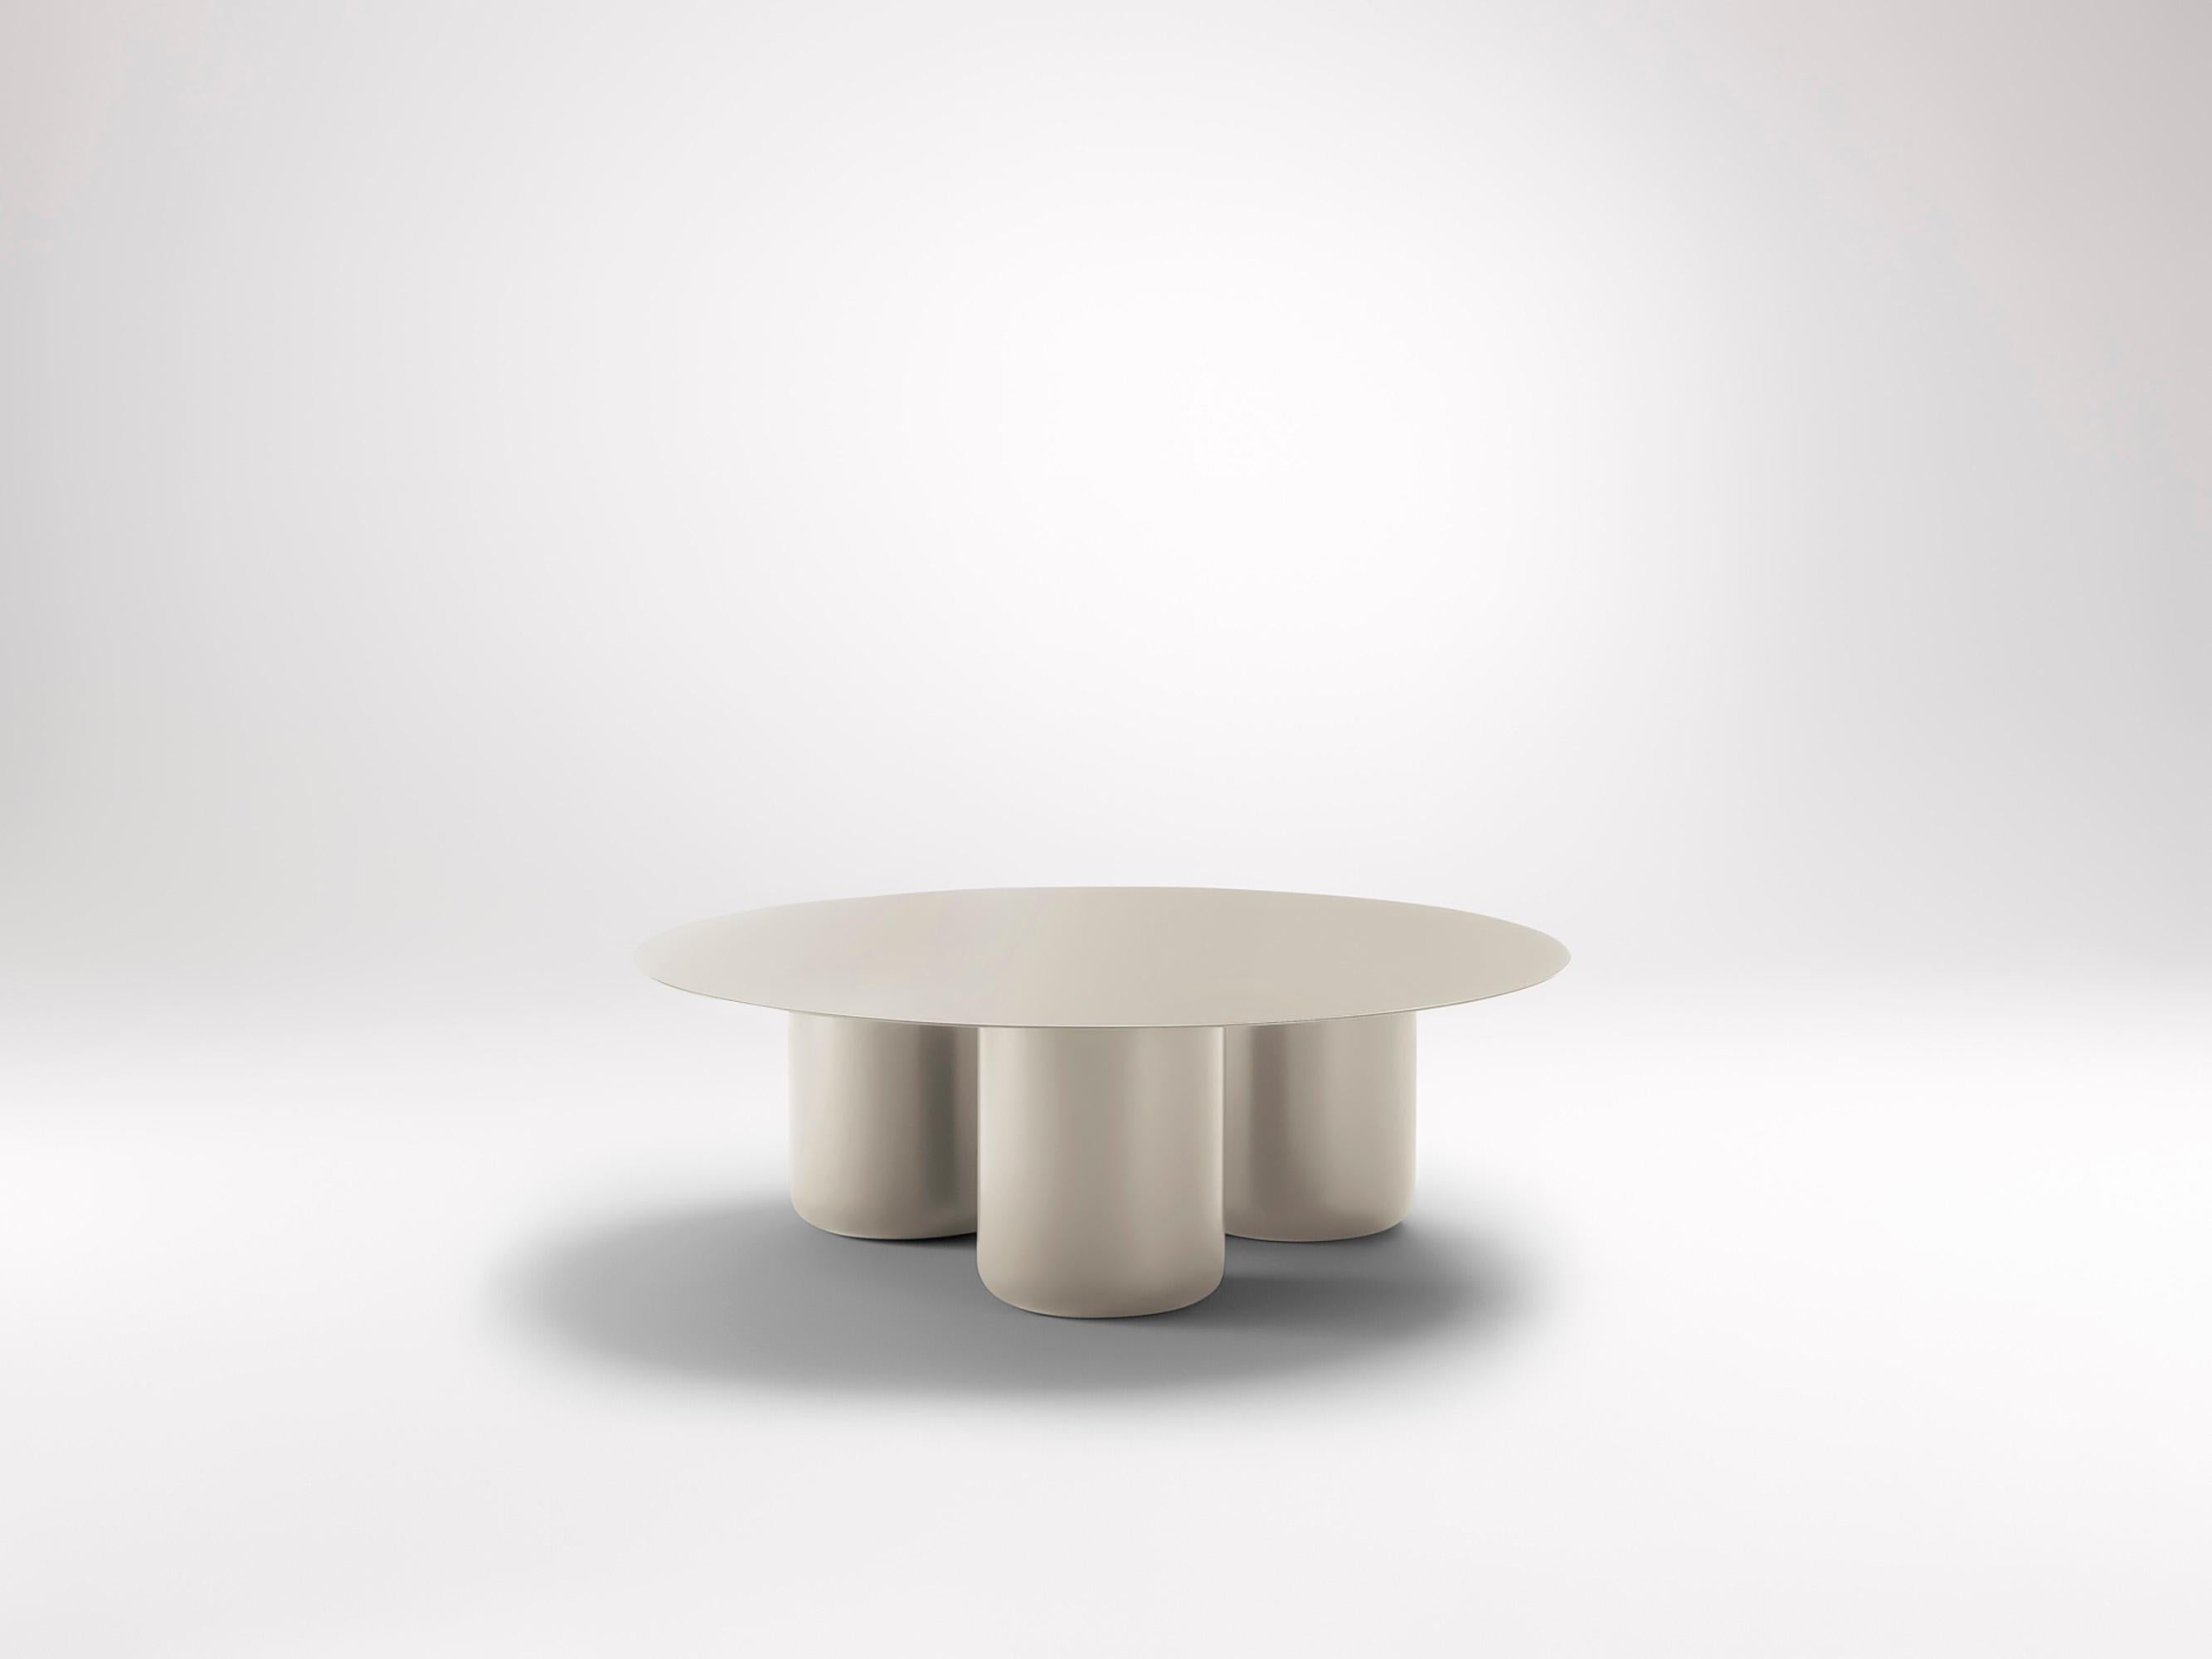 Surfmist Round Table by Coco Flip
Dimensions: D 100 x H 32 / 36 / 40 / 42 cm
Materials: Mild steel, powder-coated with zinc undercoat. 
Weight: 34 kg

Coco Flip is a Melbourne based furniture and lighting design studio, run by us, Kate Stokes and